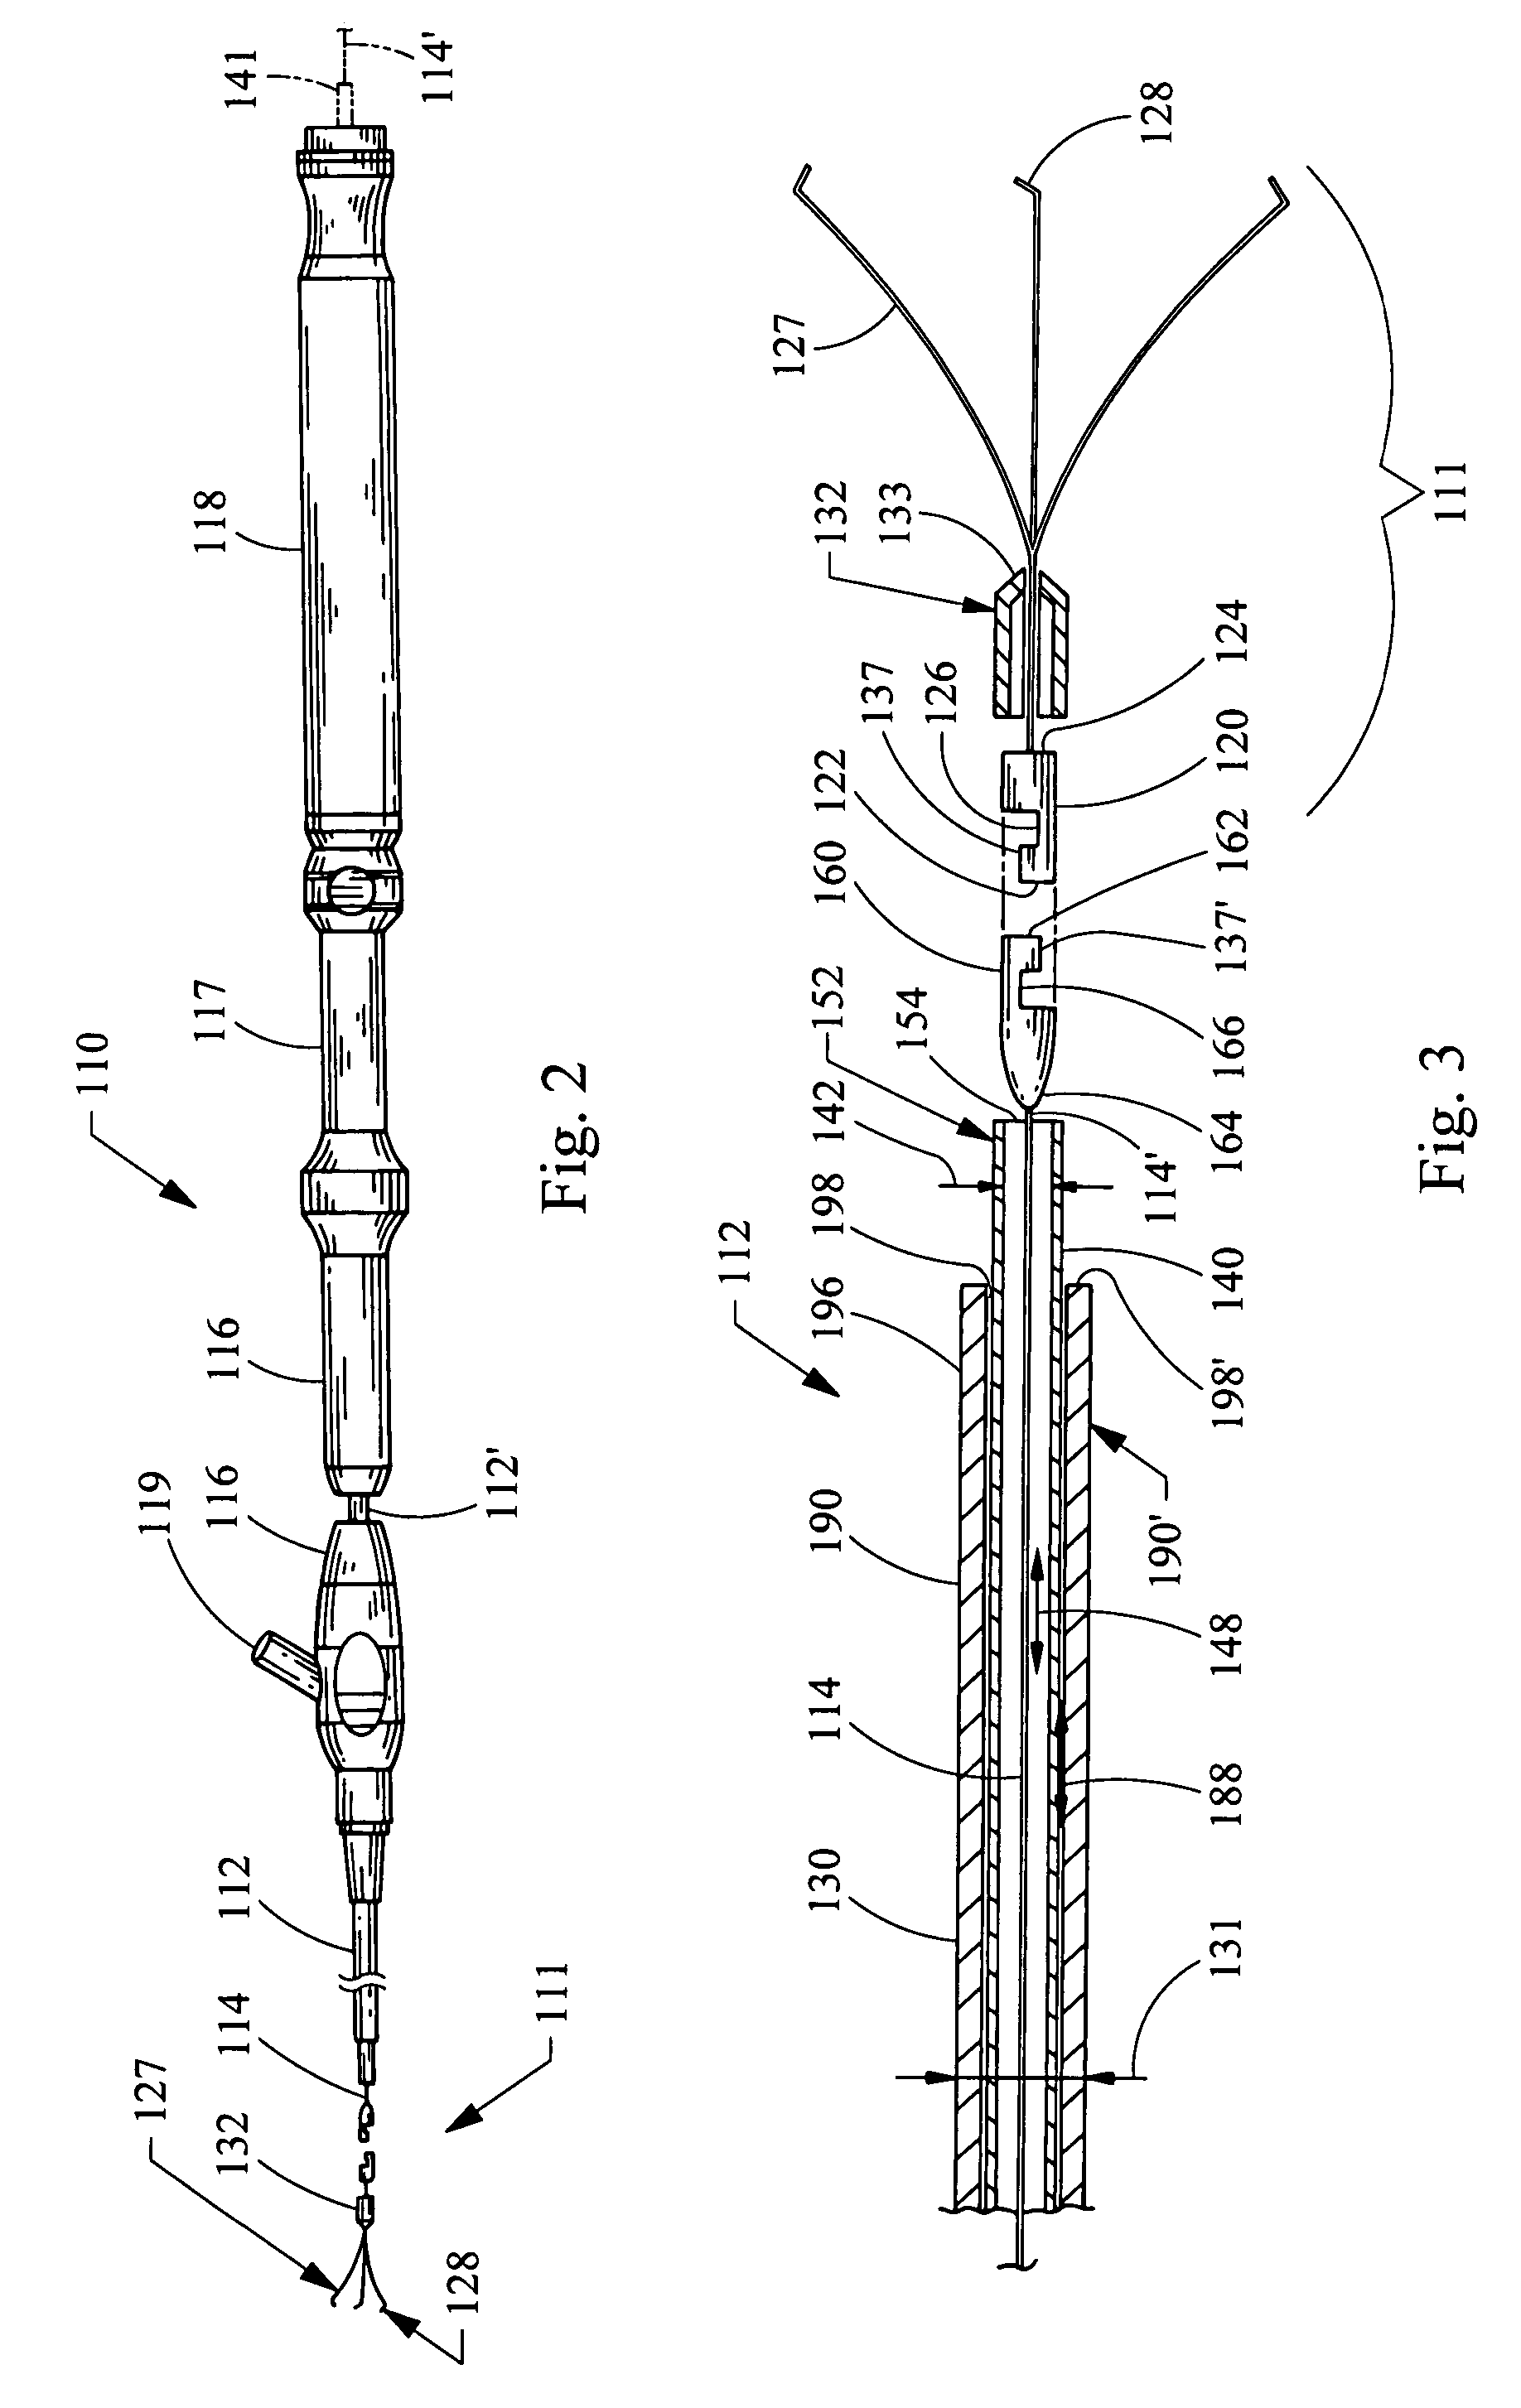 Clip device and protective cap, and methods of using the protective cap and clip device with an endoscope for grasping tissue endoscopically